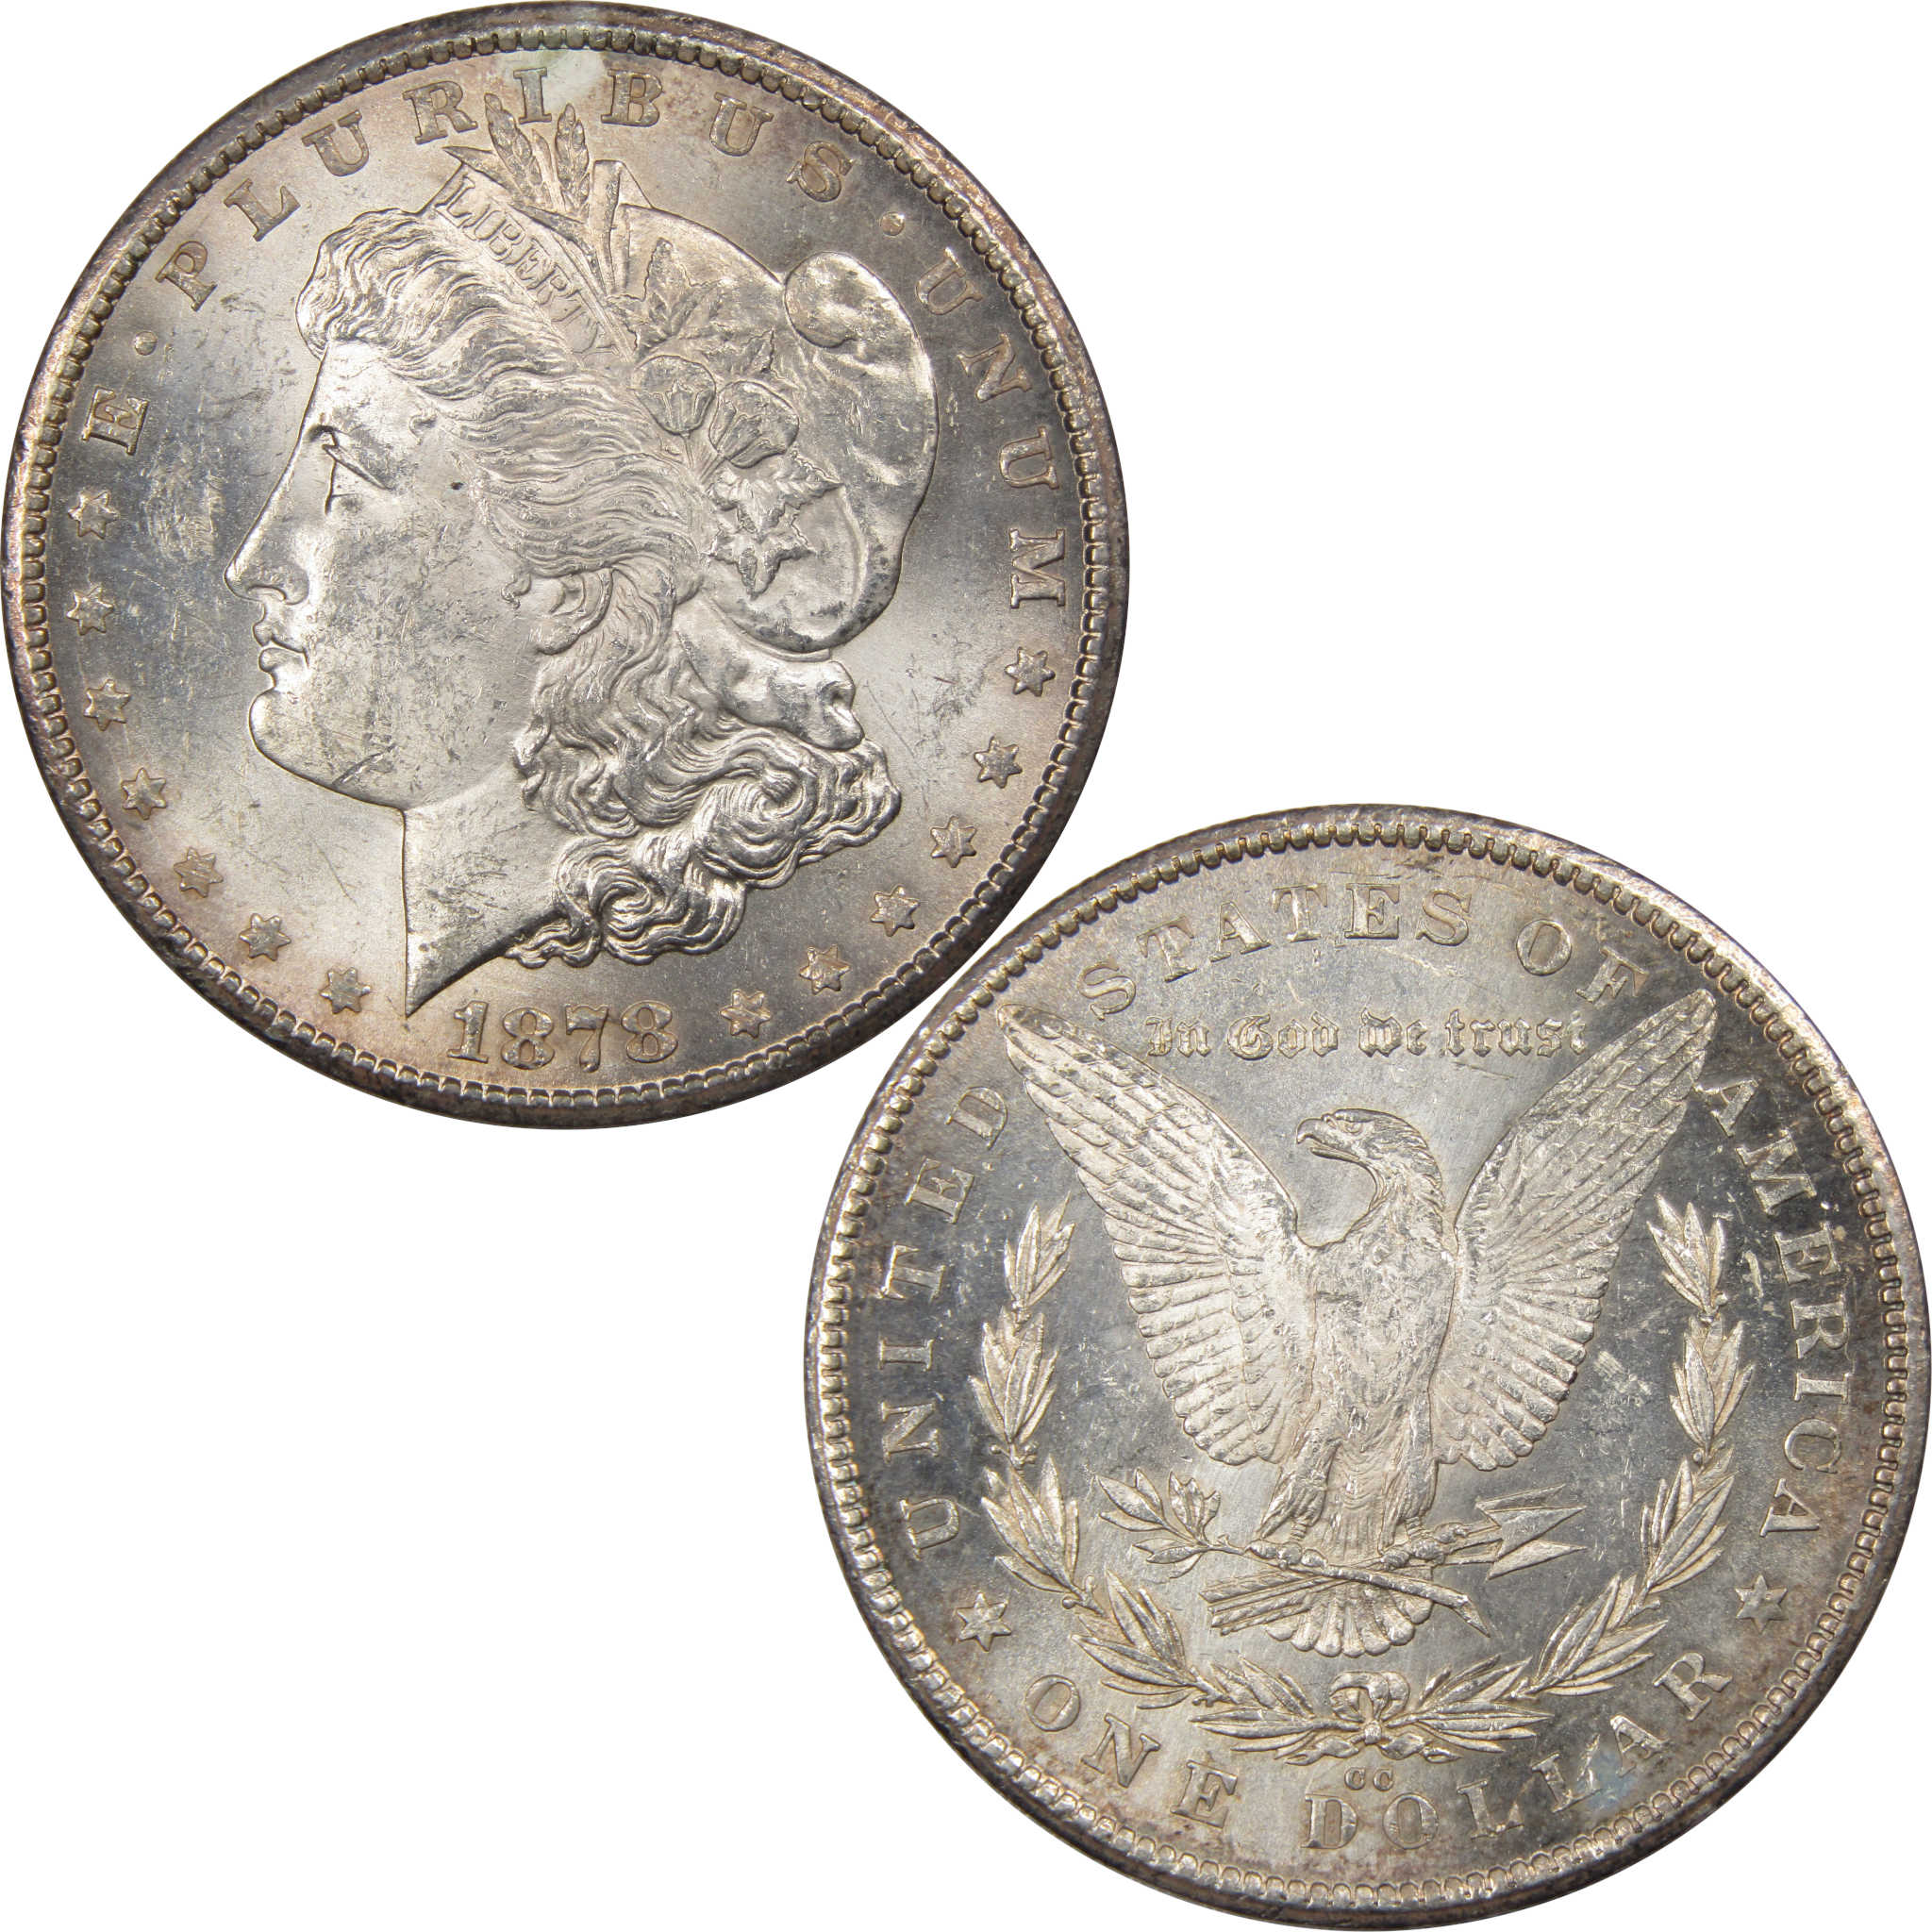 1878 CC Morgan Dollar BU Uncirculated Mint State 90% Silver SKU:I1463 - Morgan coin - Morgan silver dollar - Morgan silver dollar for sale - Profile Coins &amp; Collectibles